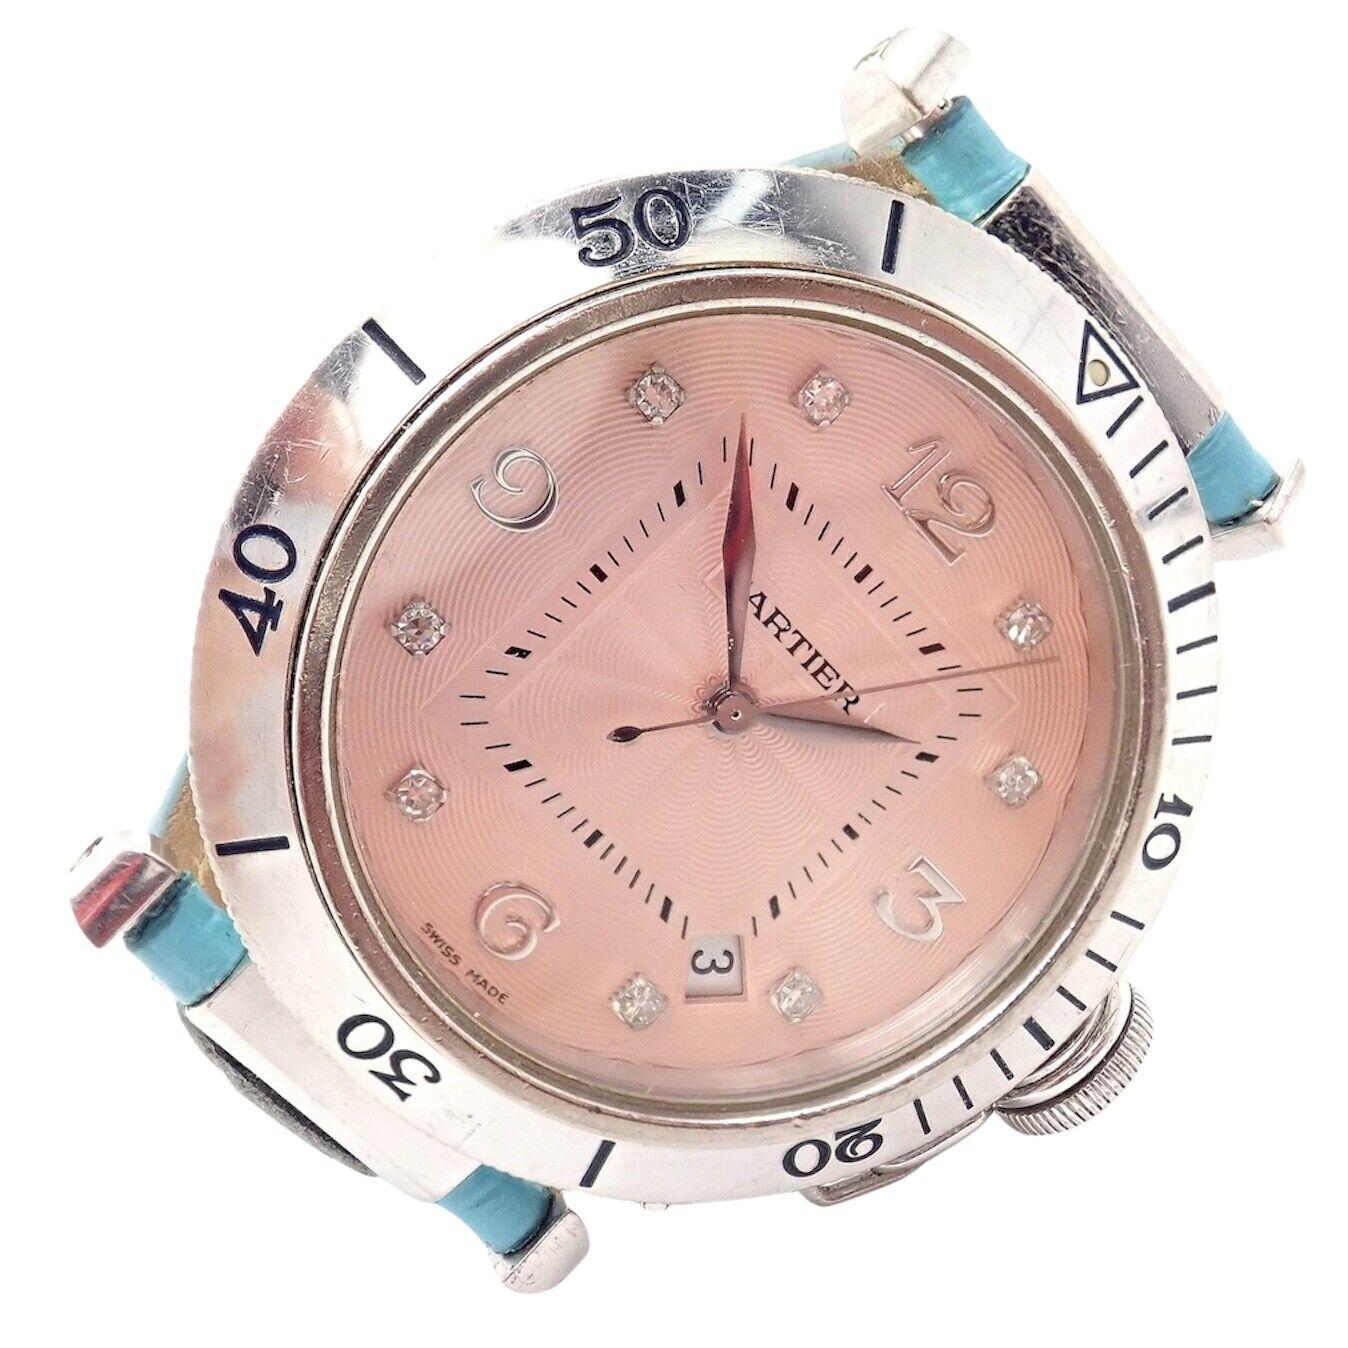 Cartier Pasha Pink Dial Diamond Automatic White Gold Watch For Sale 4